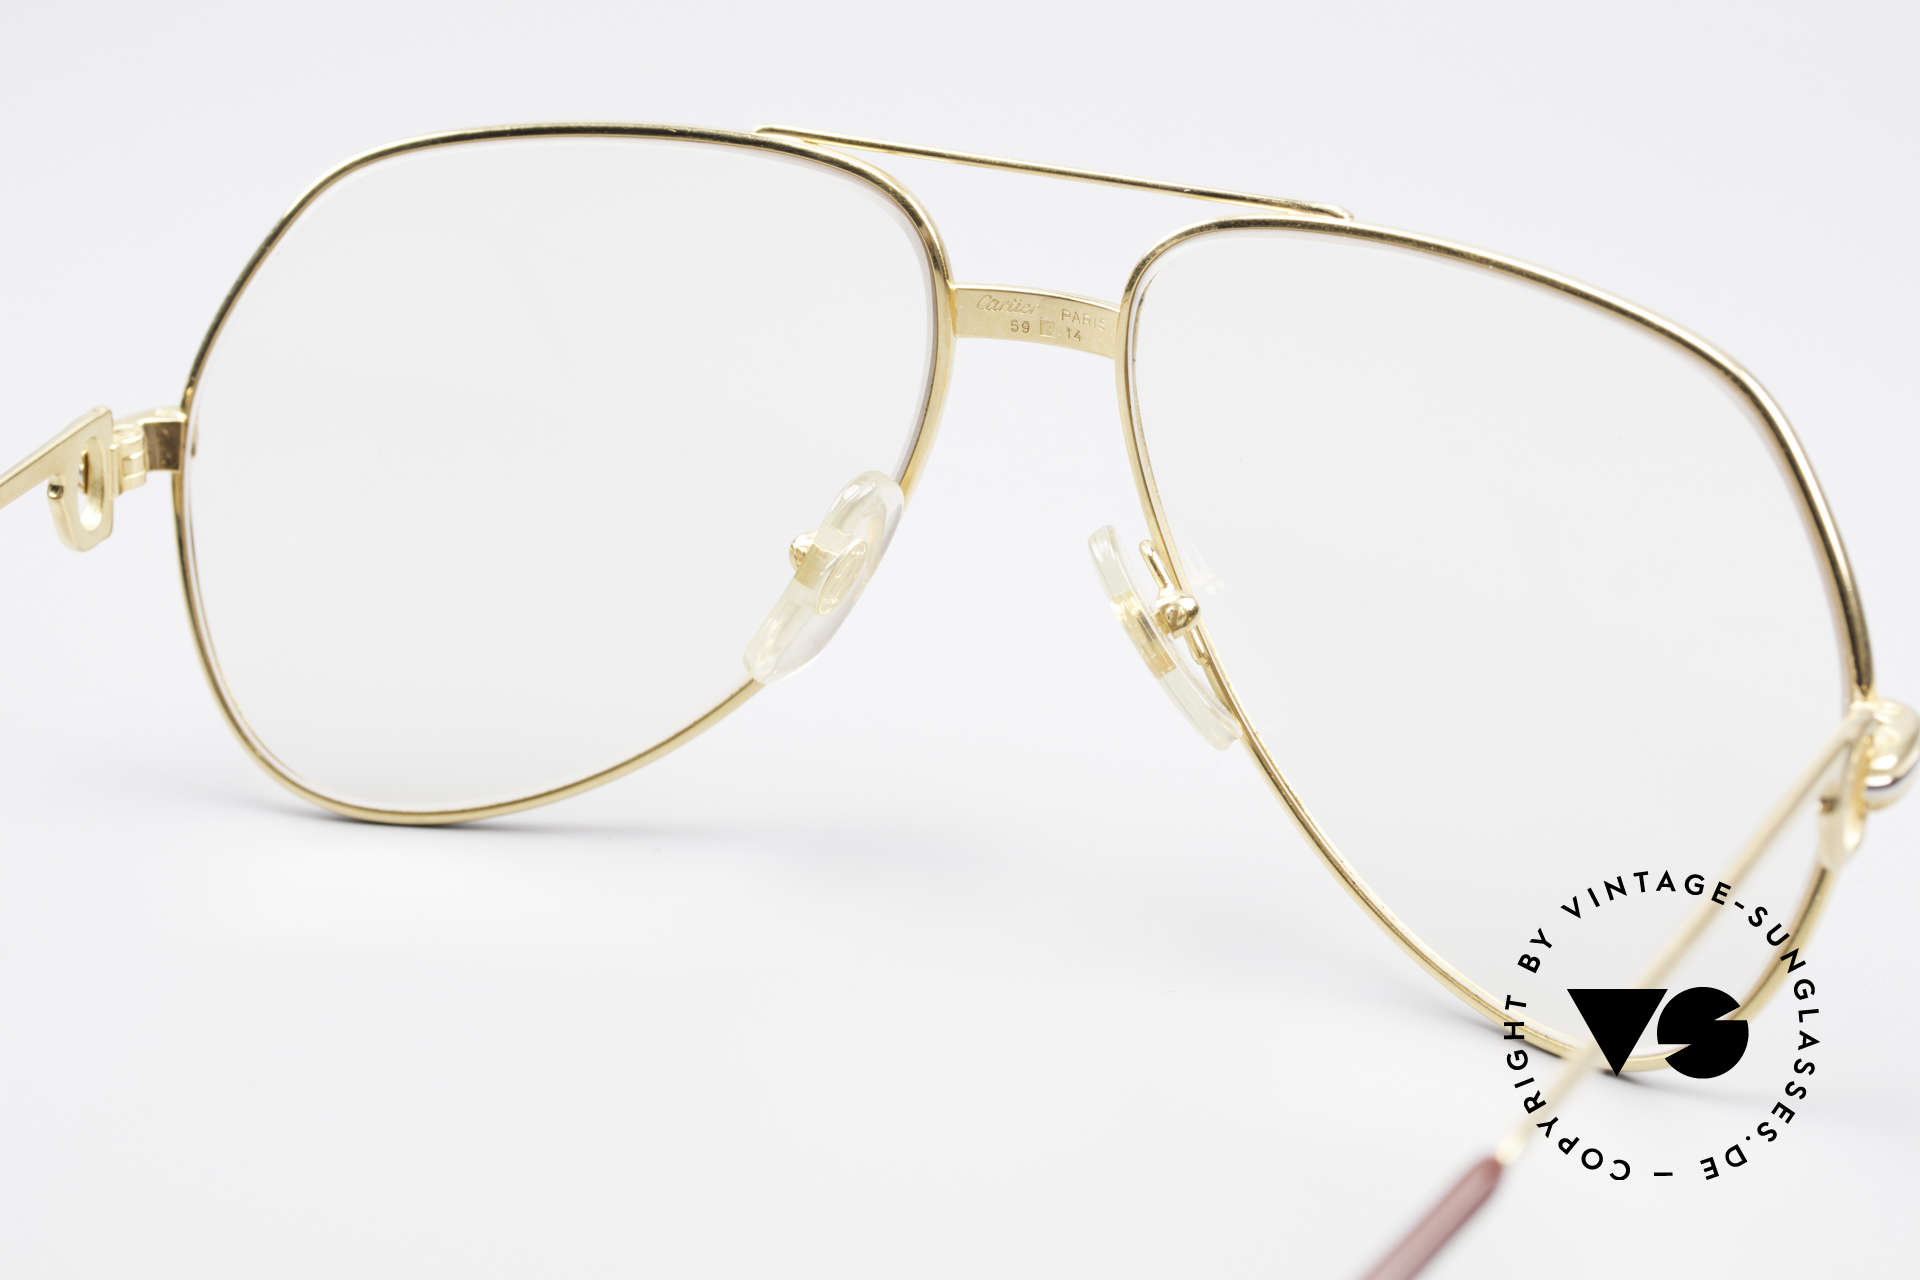 Cartier Vendome LC - M Changeable Cartier Lenses, the lenses are darker in the sun and lighter in the shade, Made for Men and Women